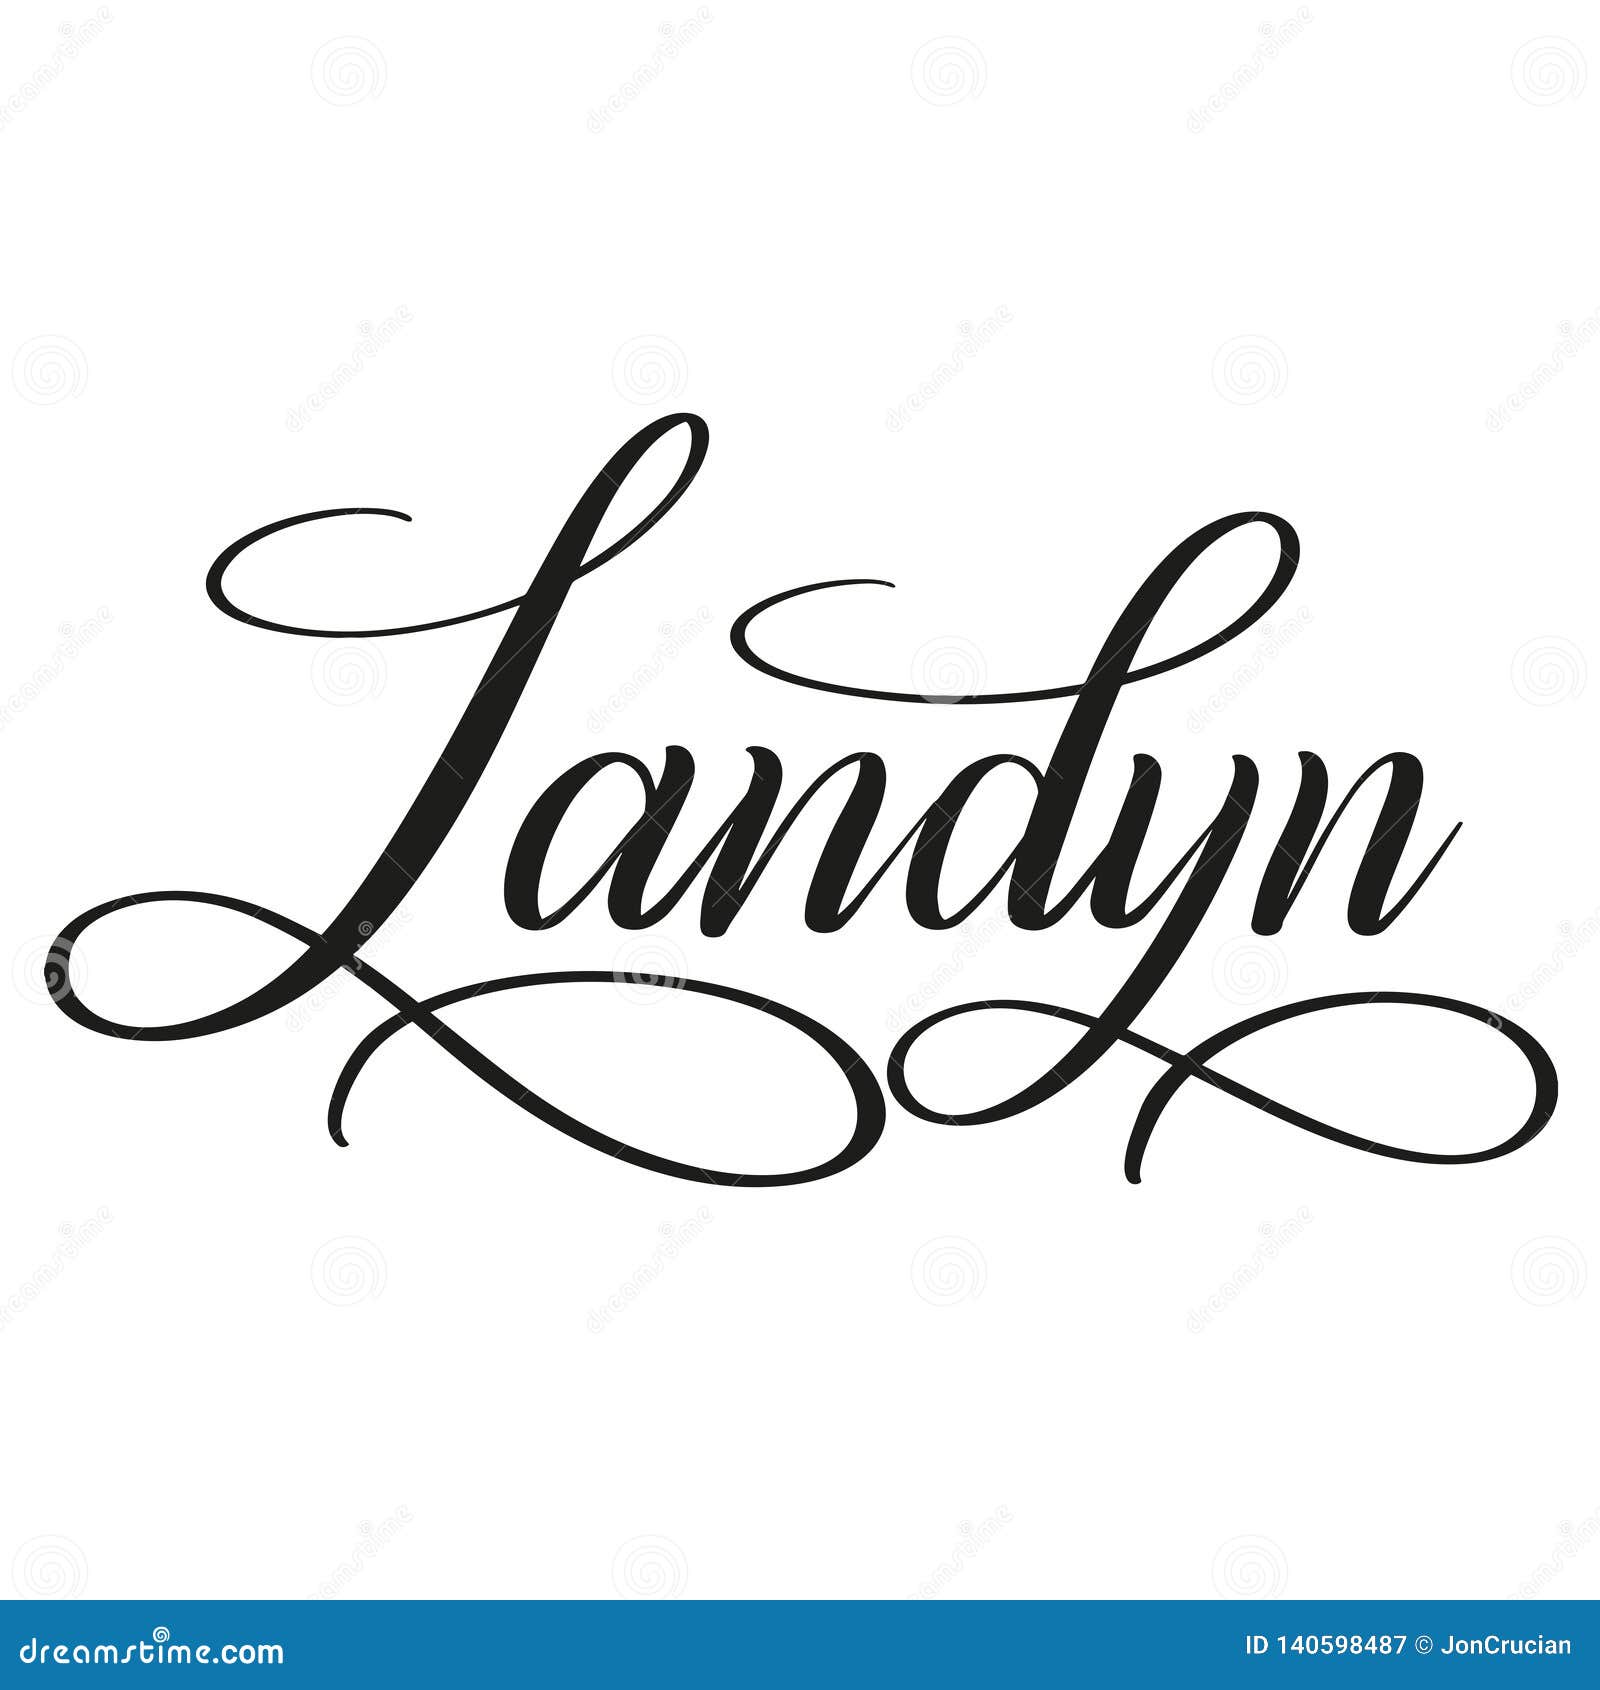 Landyn. Calligraphic Spelling of the Name. Stock Vector